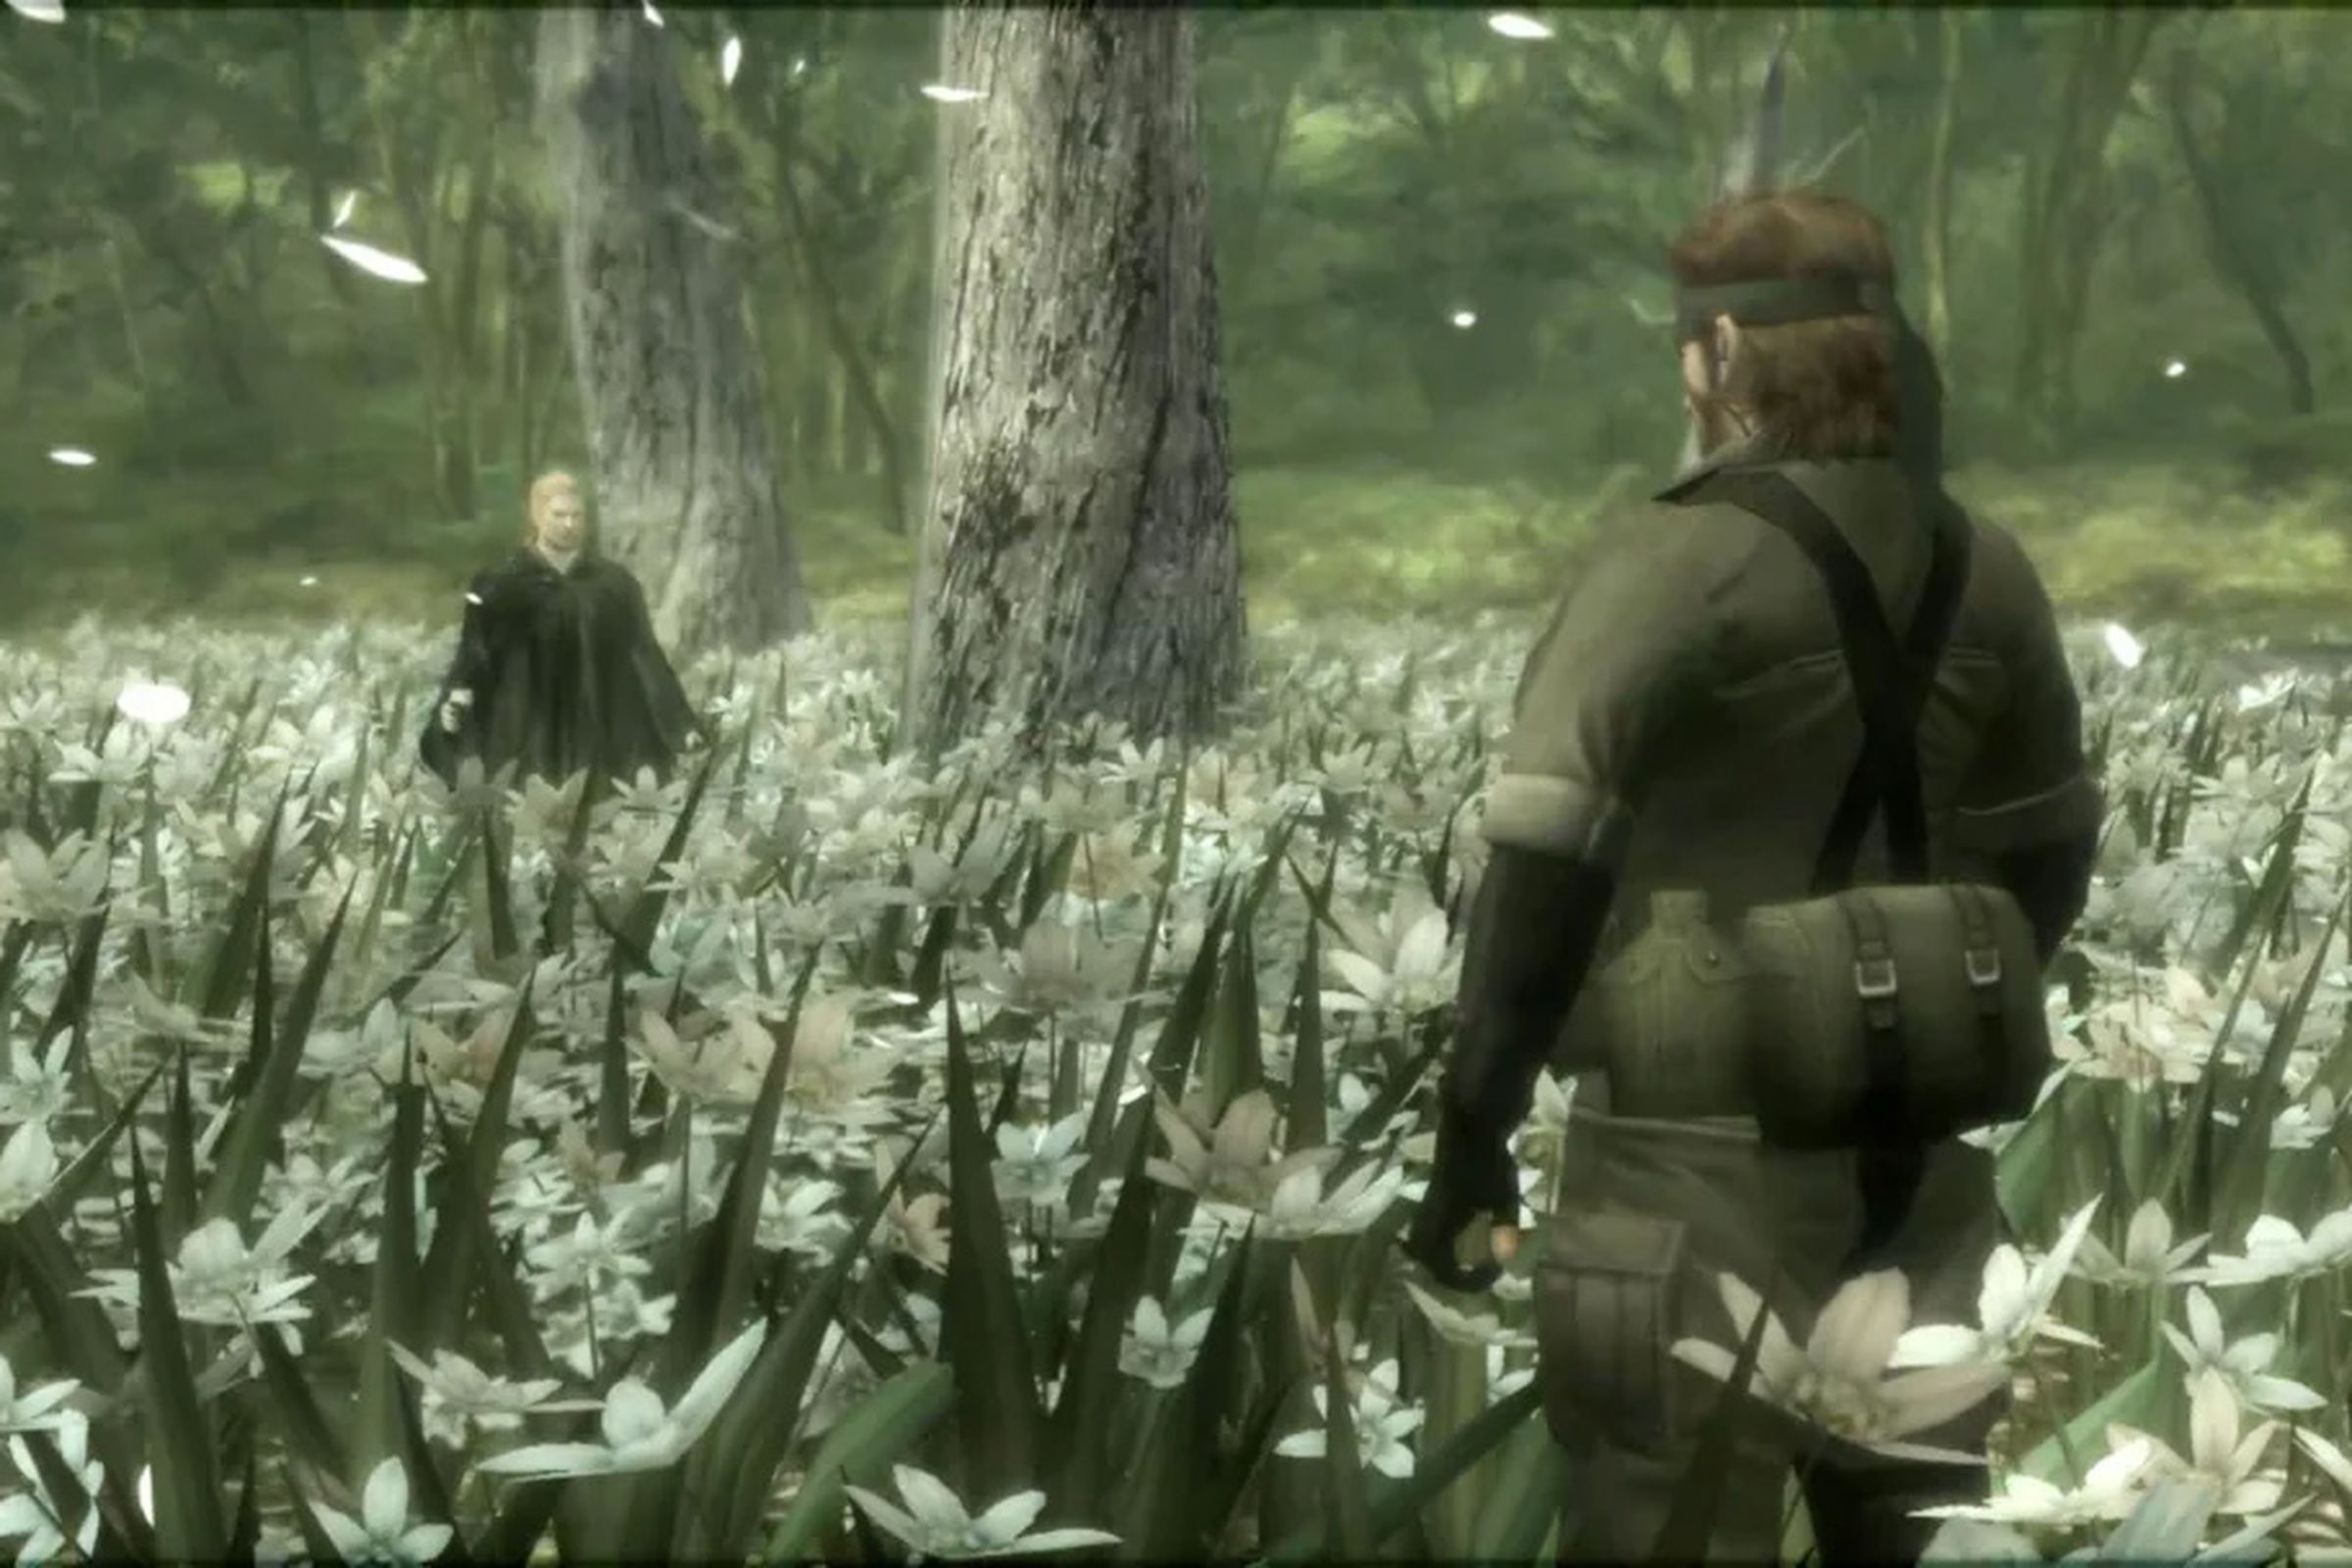 Naked Snake and The Boss face off in a field of flowers.